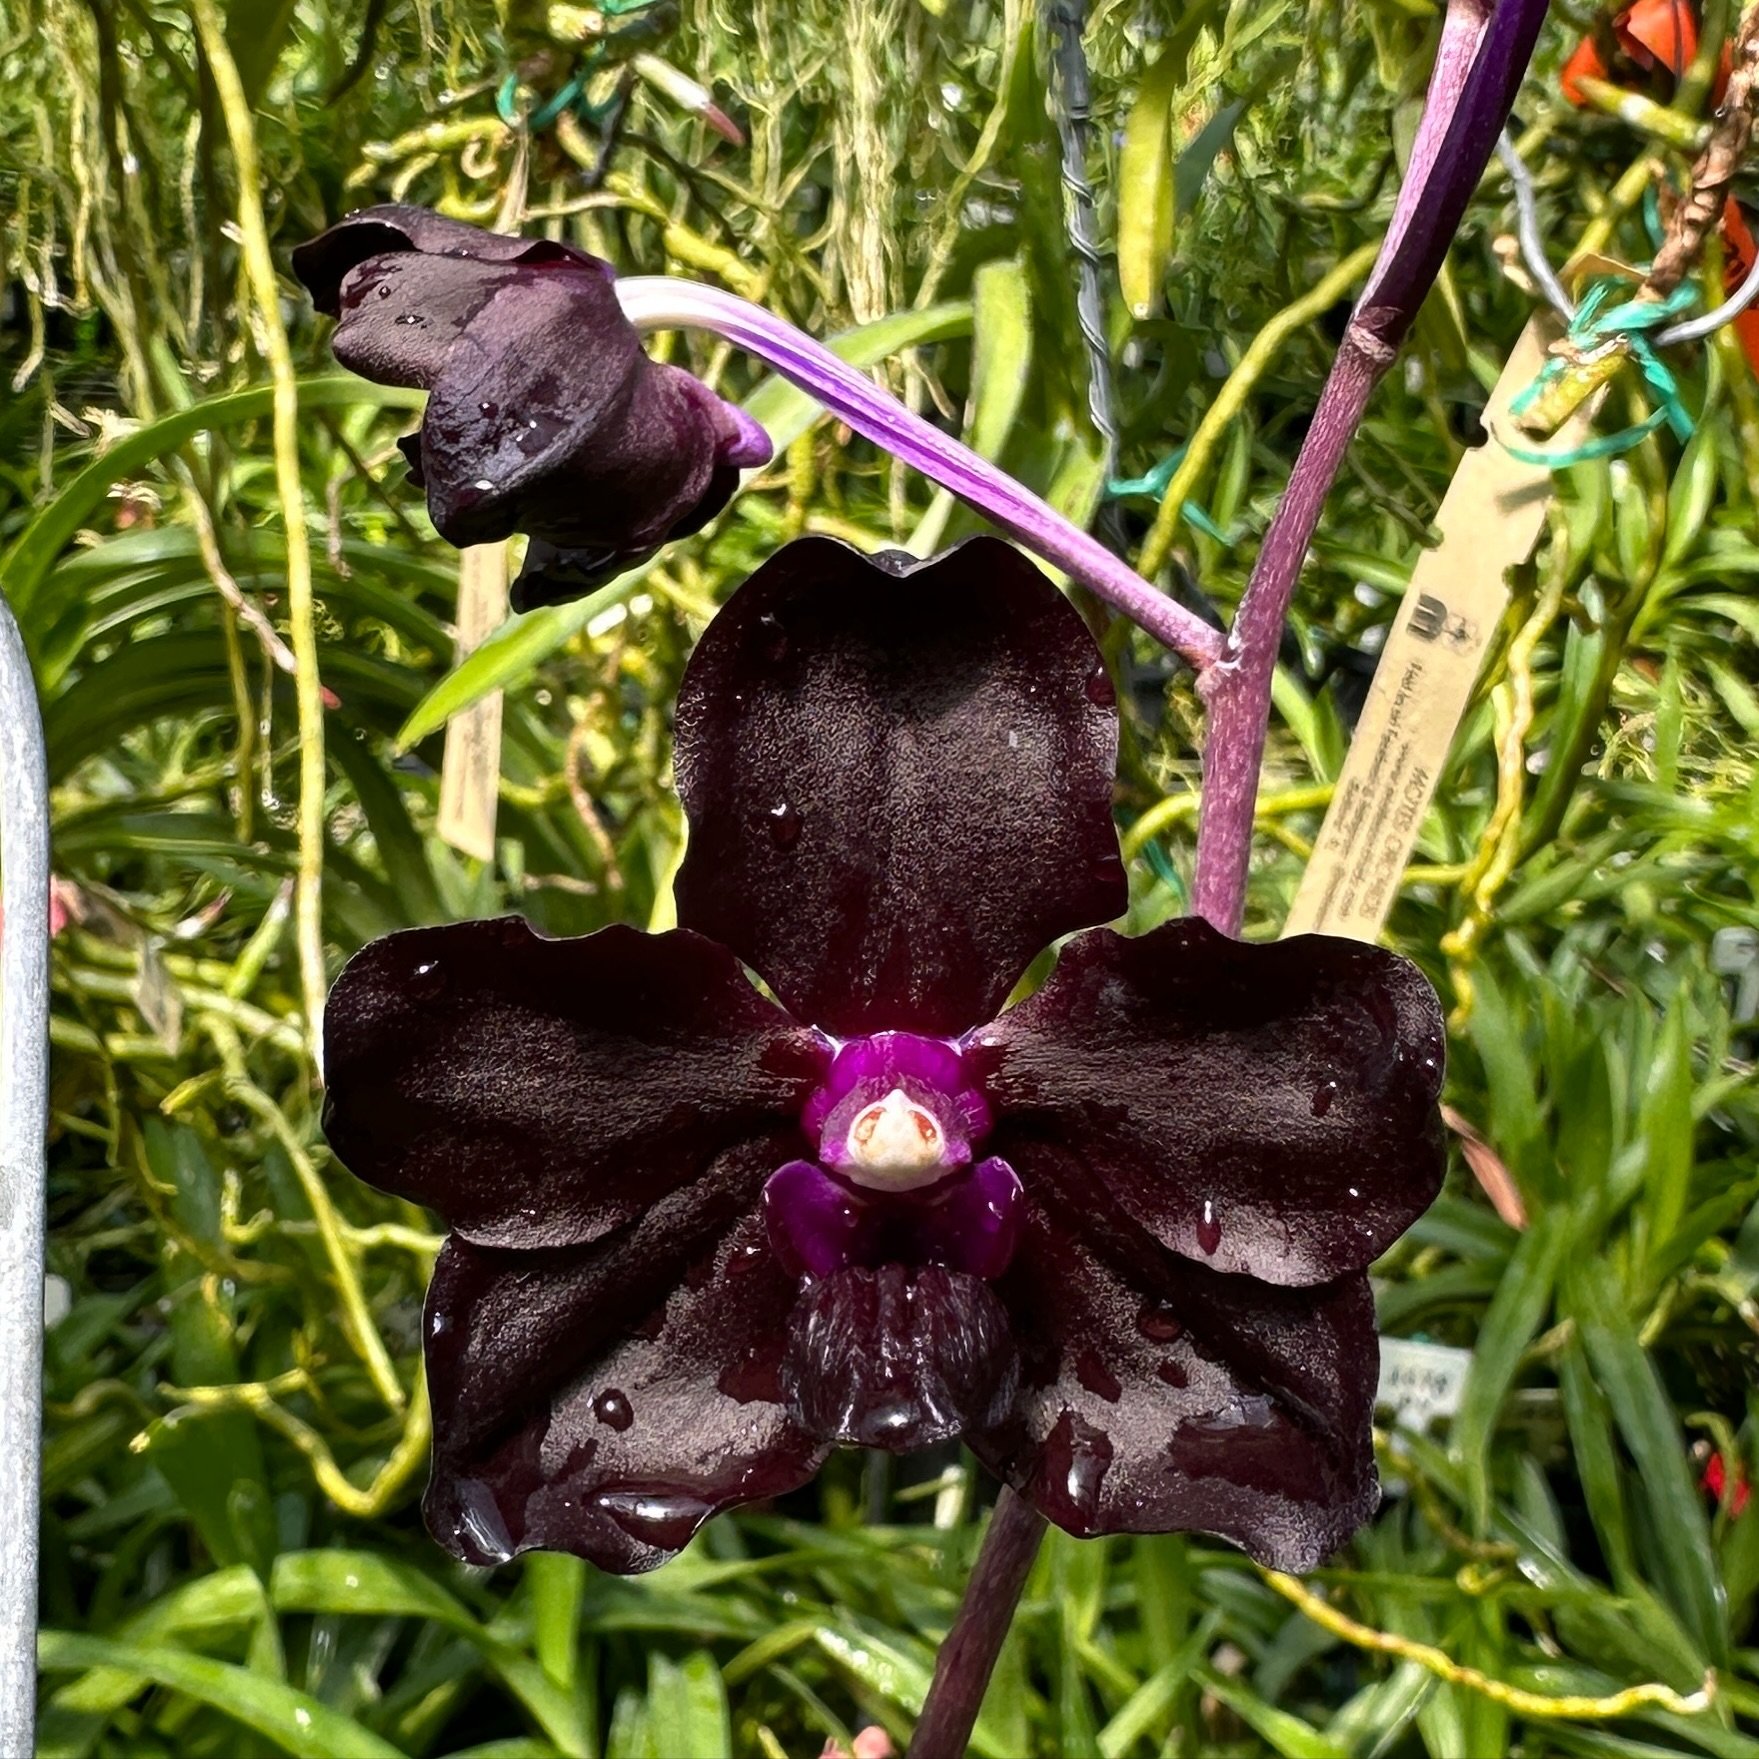 Motes X-12

Want to help us grow? Click &ldquo;follow&rdquo; then share the posts that make you go wow! Thanks!
.
.
.
.
.
#motesorchids
#FloridaOrchidGrowing #orchids #orchid #vanda #orchidoftheday #orchidpeople #orchidshare #orchidworld
#IGorchids #